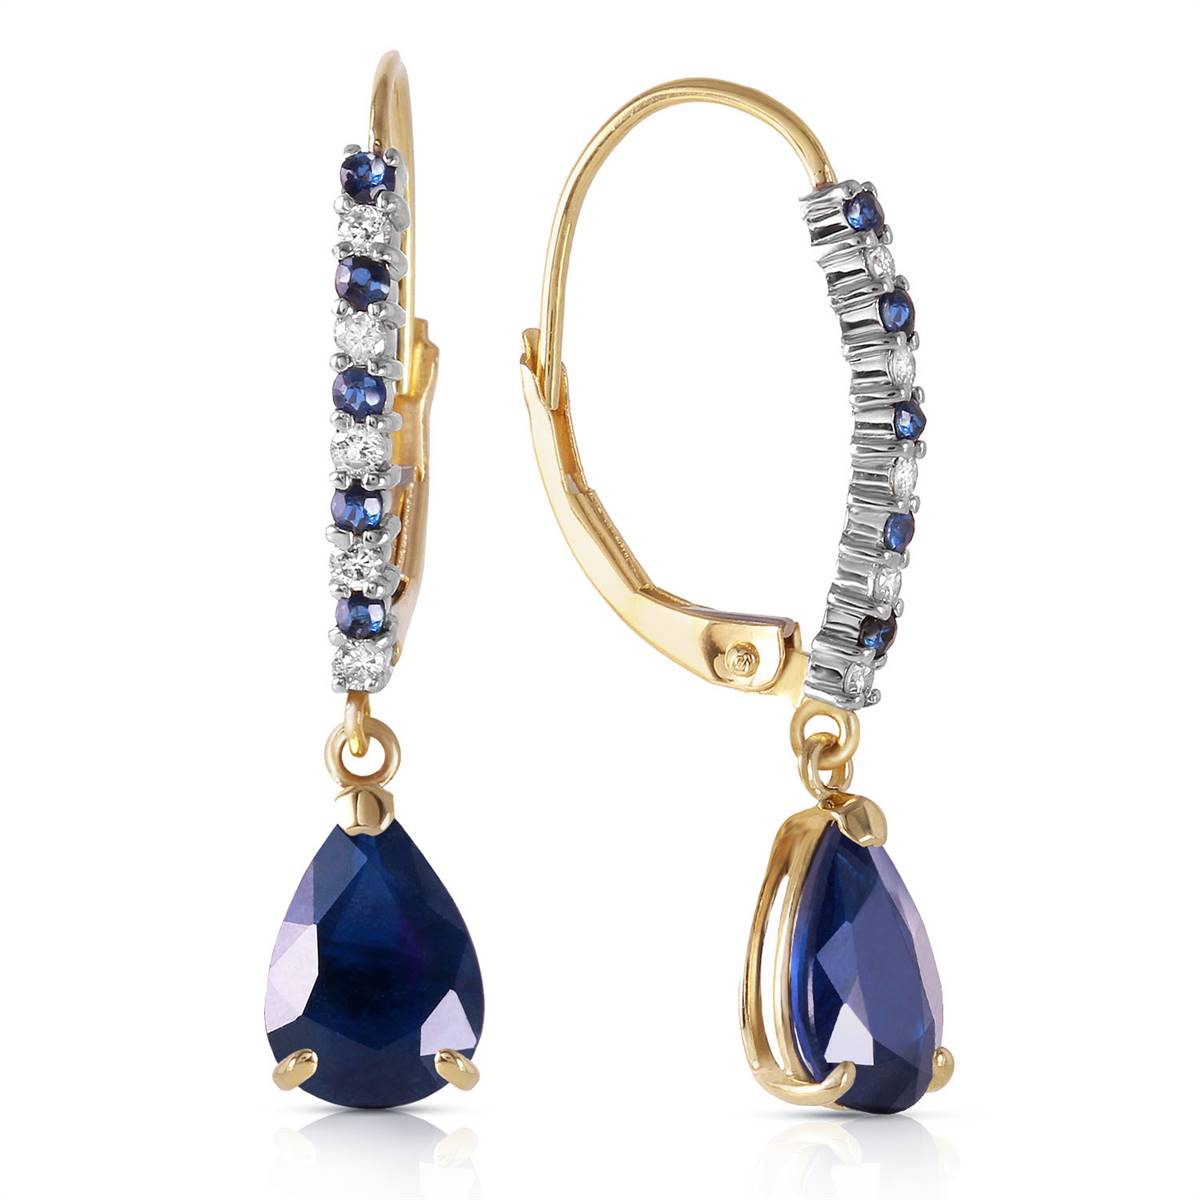 3.35 Carat 14K Solid Yellow Gold Natural Sapphire Diamond Earrings